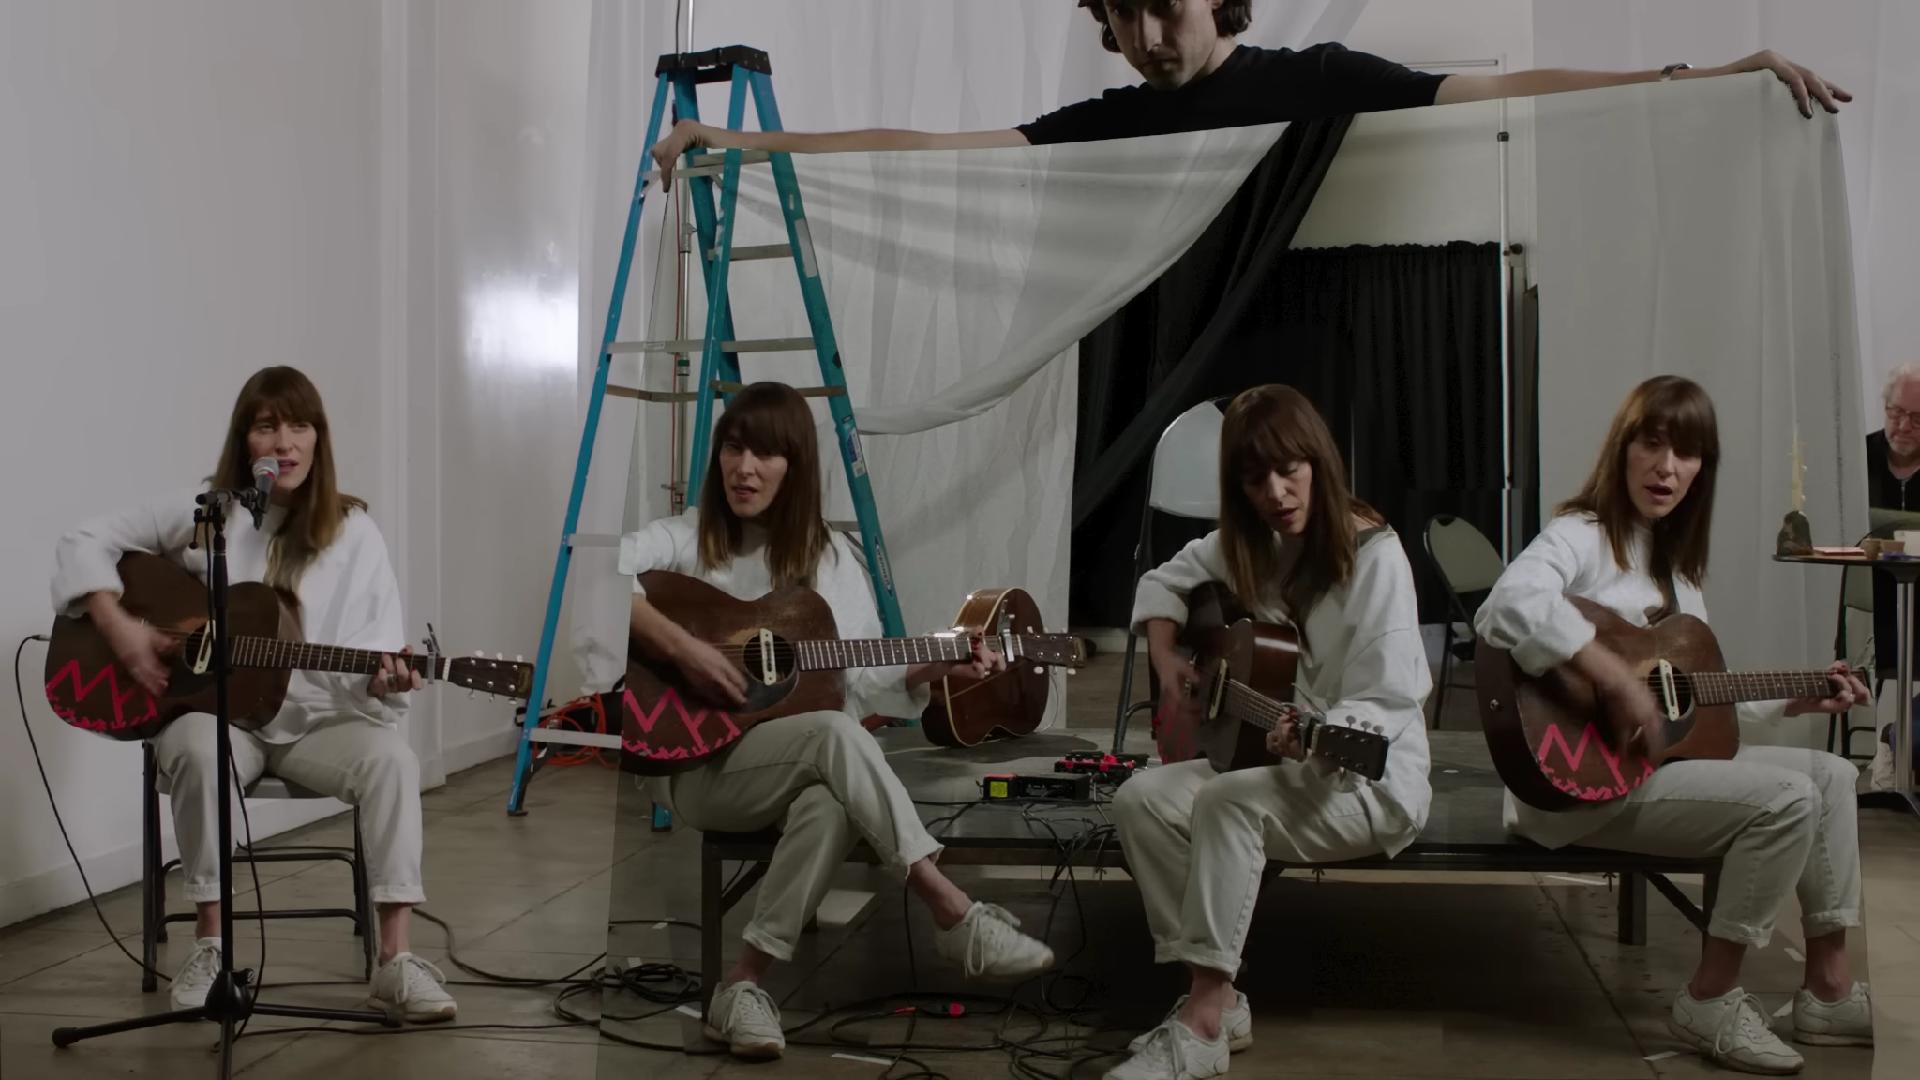 Feist, "Hiding Out in the Open" clip screenshot